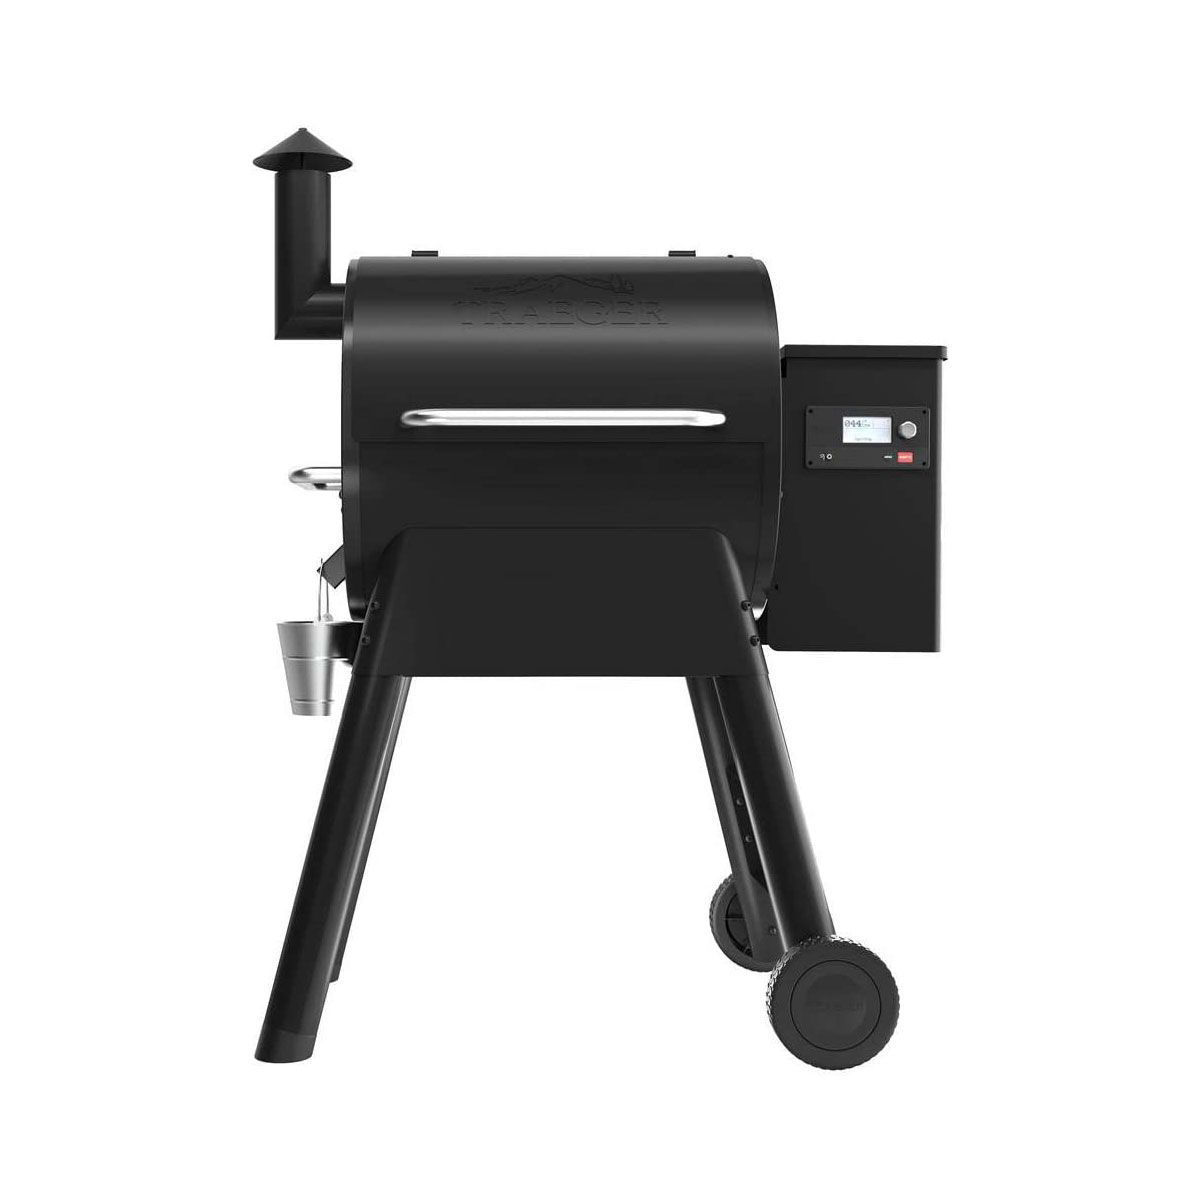 Picture of TRAEGER PRO 575 PELLET GRILL